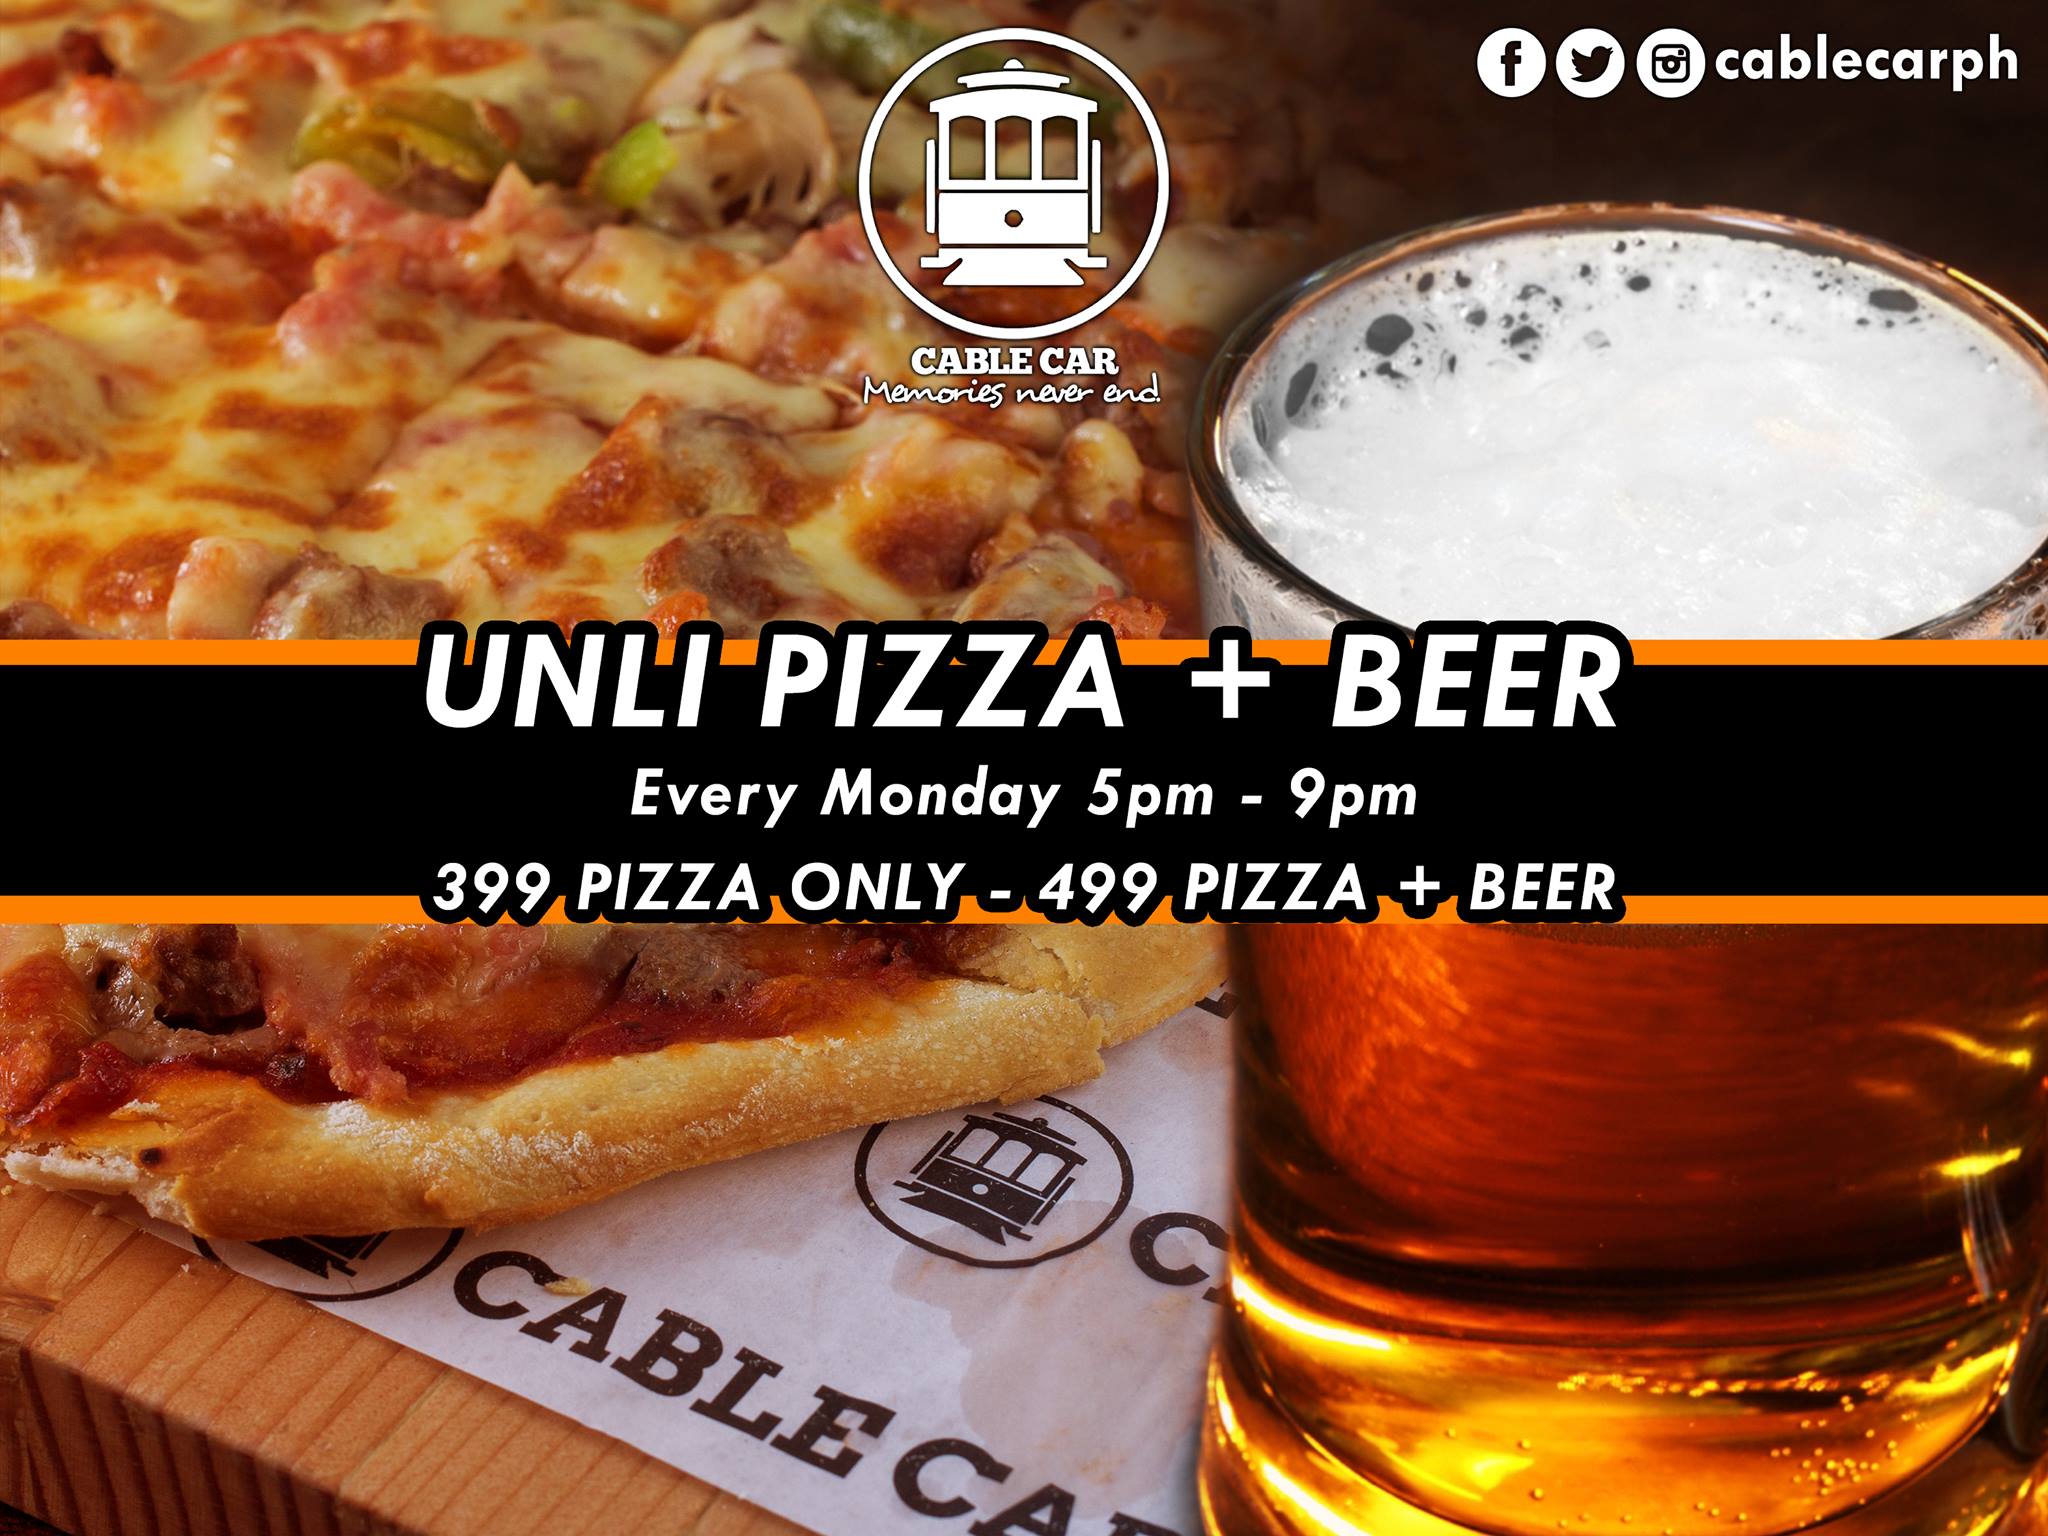 Cable Car has Unli Pizza and Beer!